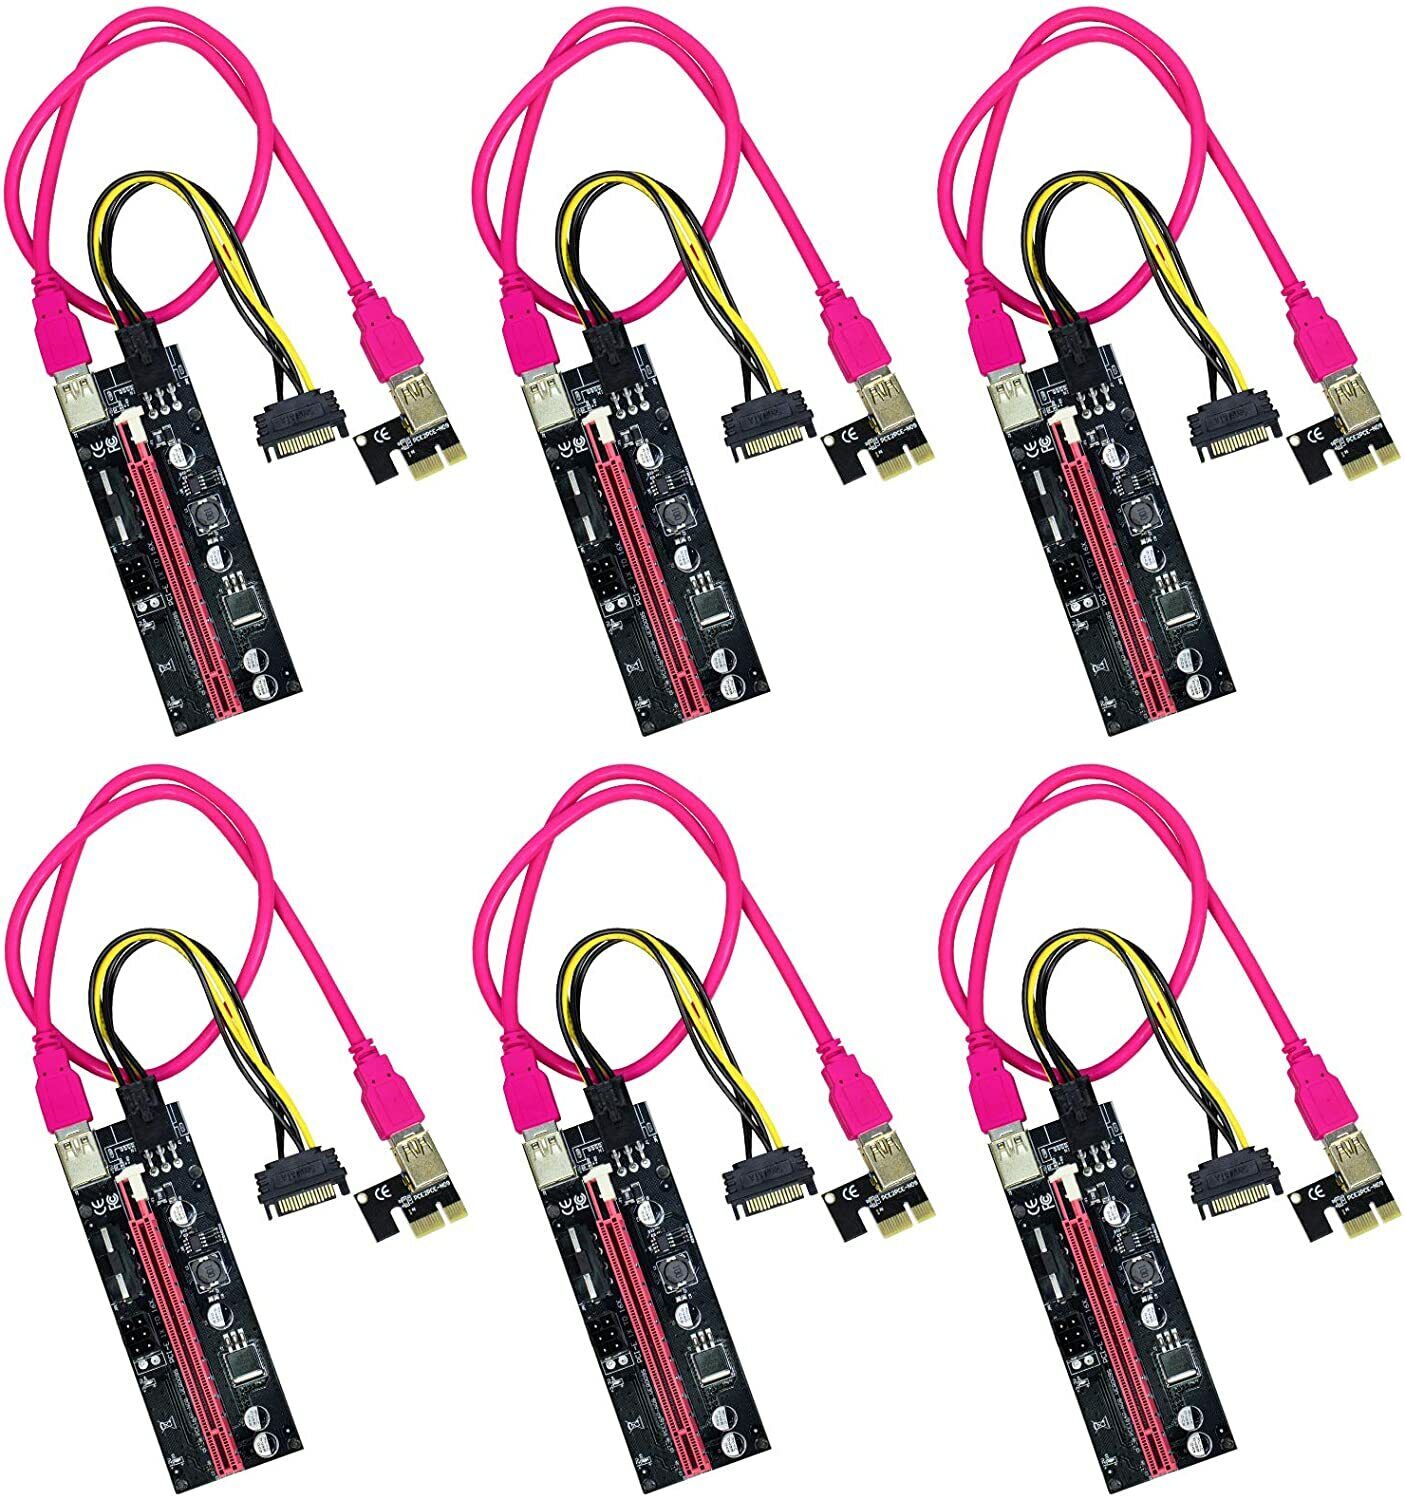 NEW 6 Pack GPU Mining Powered Riser Adapter VER009S PCI-E Riser Card For Bitcoin